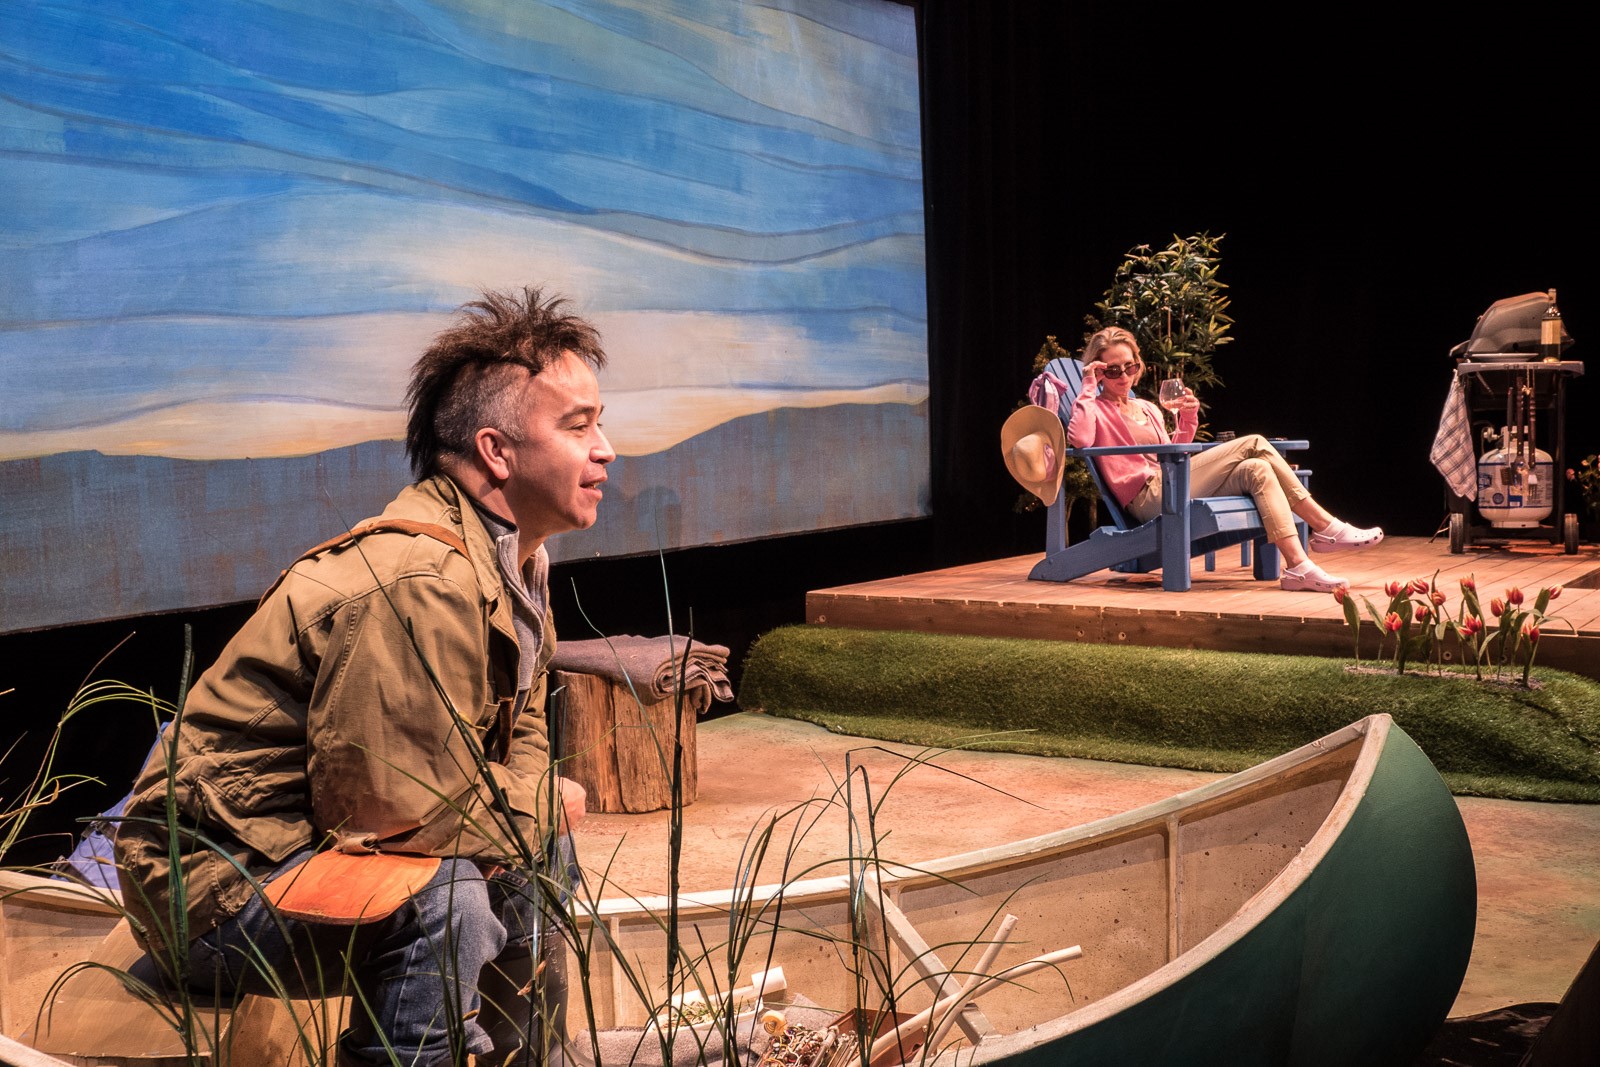 A production still from Tarragon Theatre's touring production of Drew Hayden Taylor's "Cottagers and Indians" - actor Herbie Barnes perches on the edge of a canoe while Philippa Domville watches from a lounge chair.